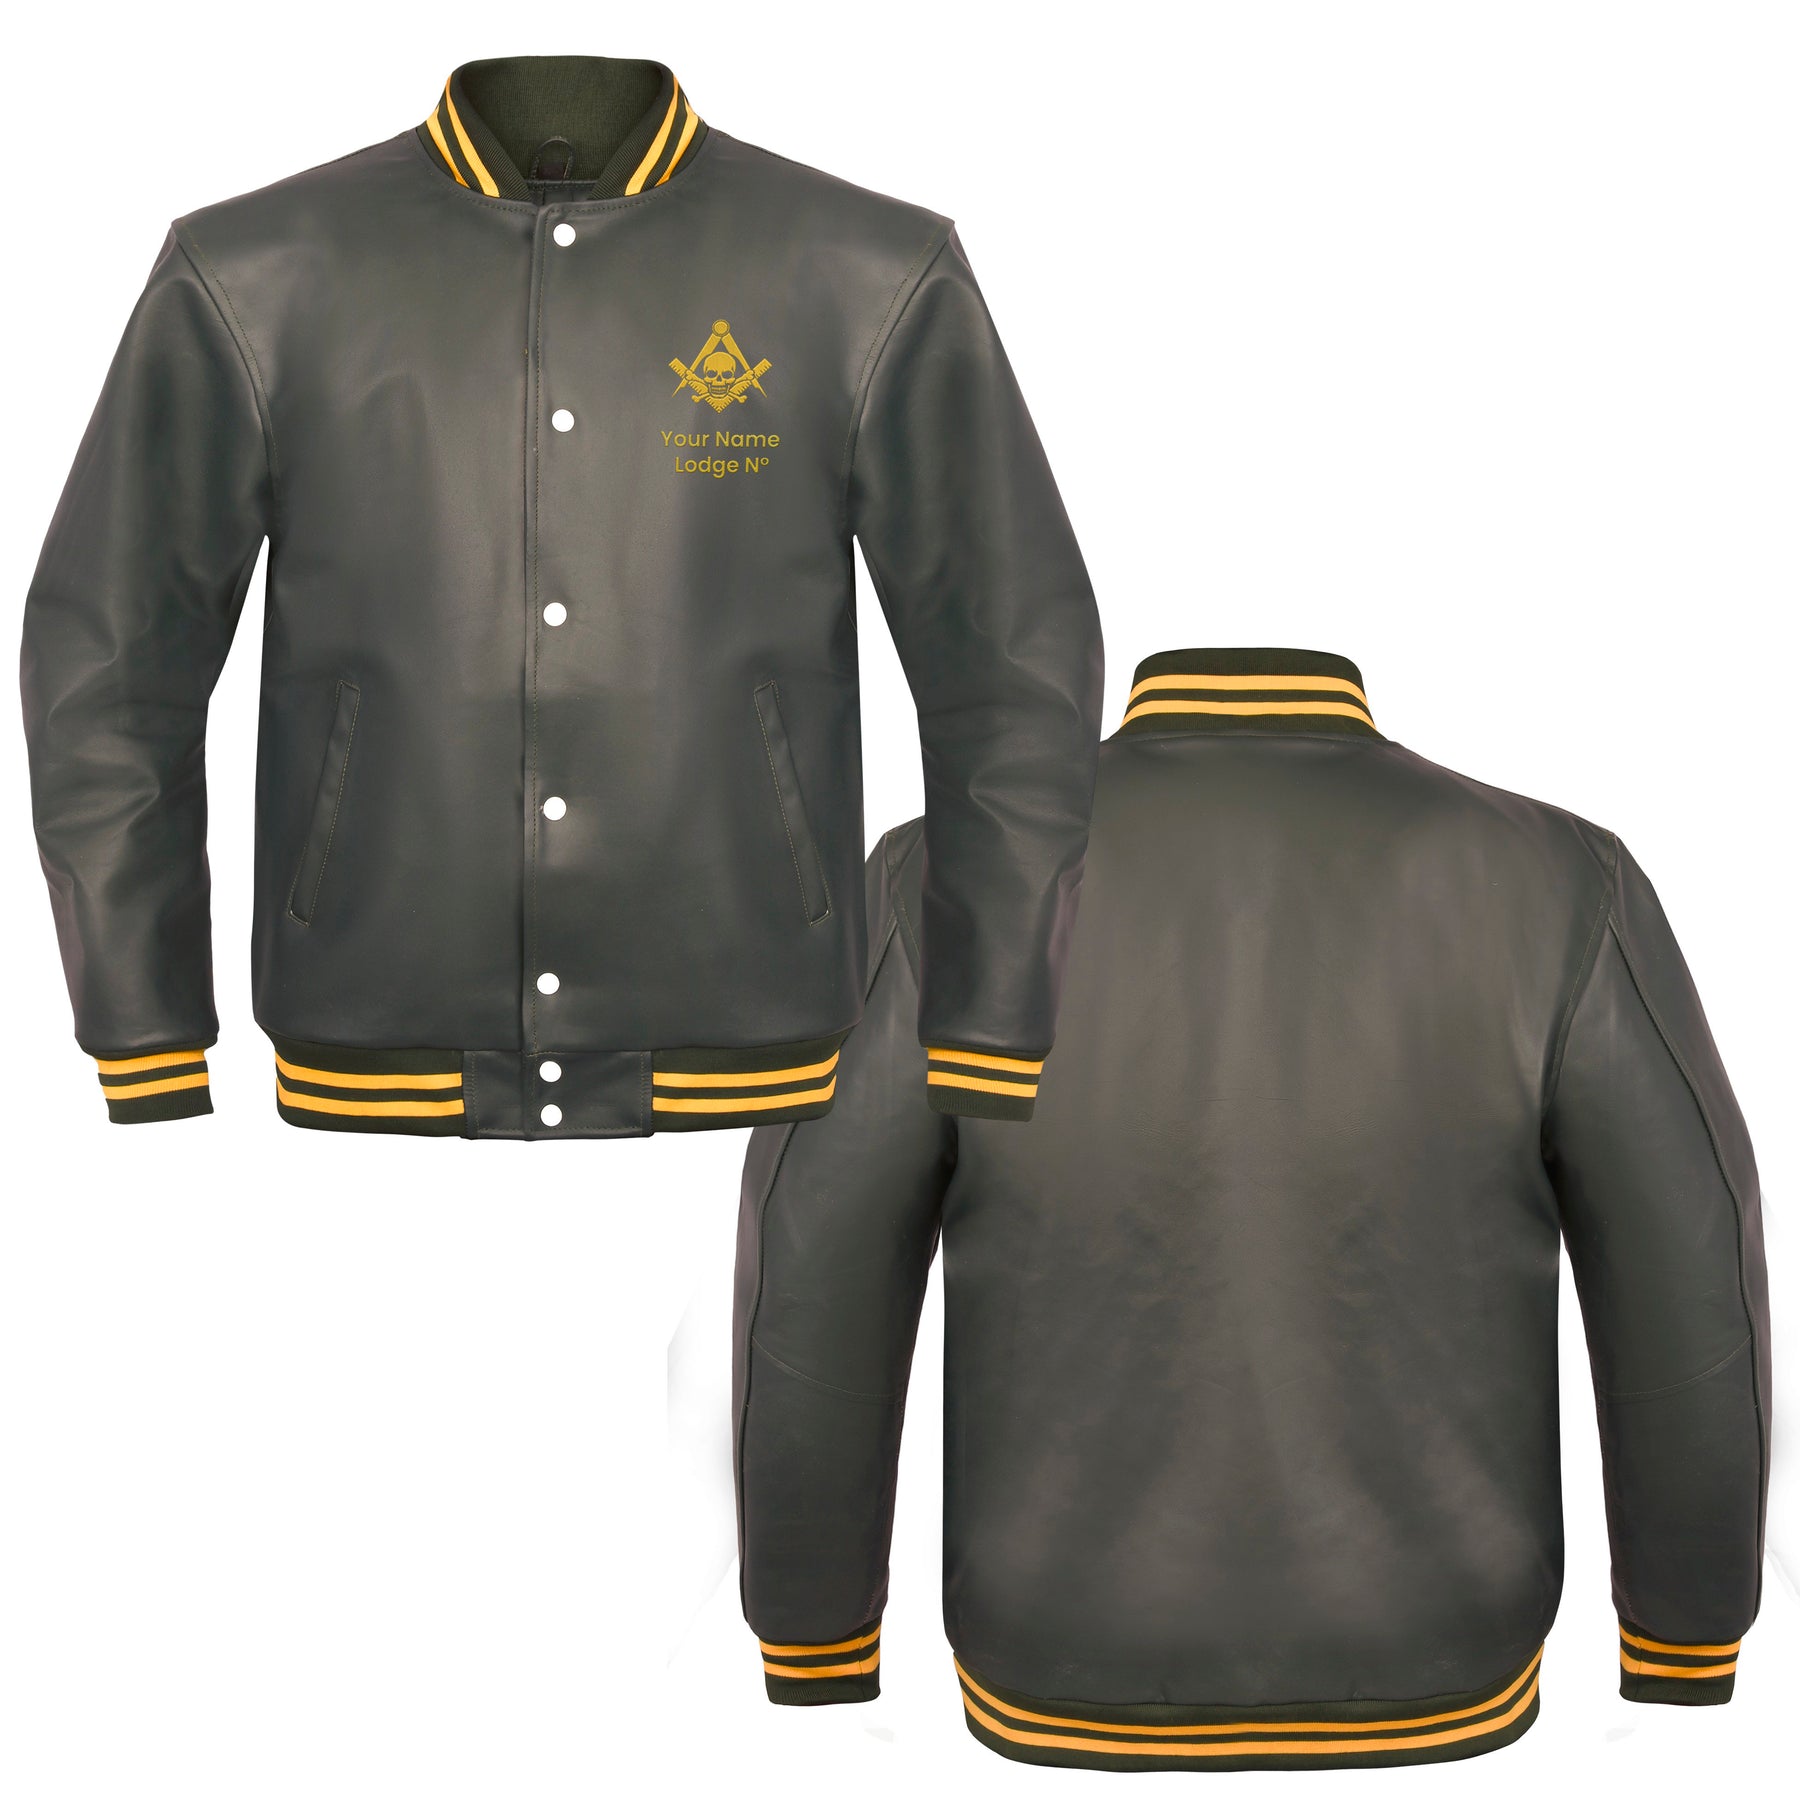 Widows Sons Jacket - Leather With Customizable Gold Embroidery - Bricks Masons